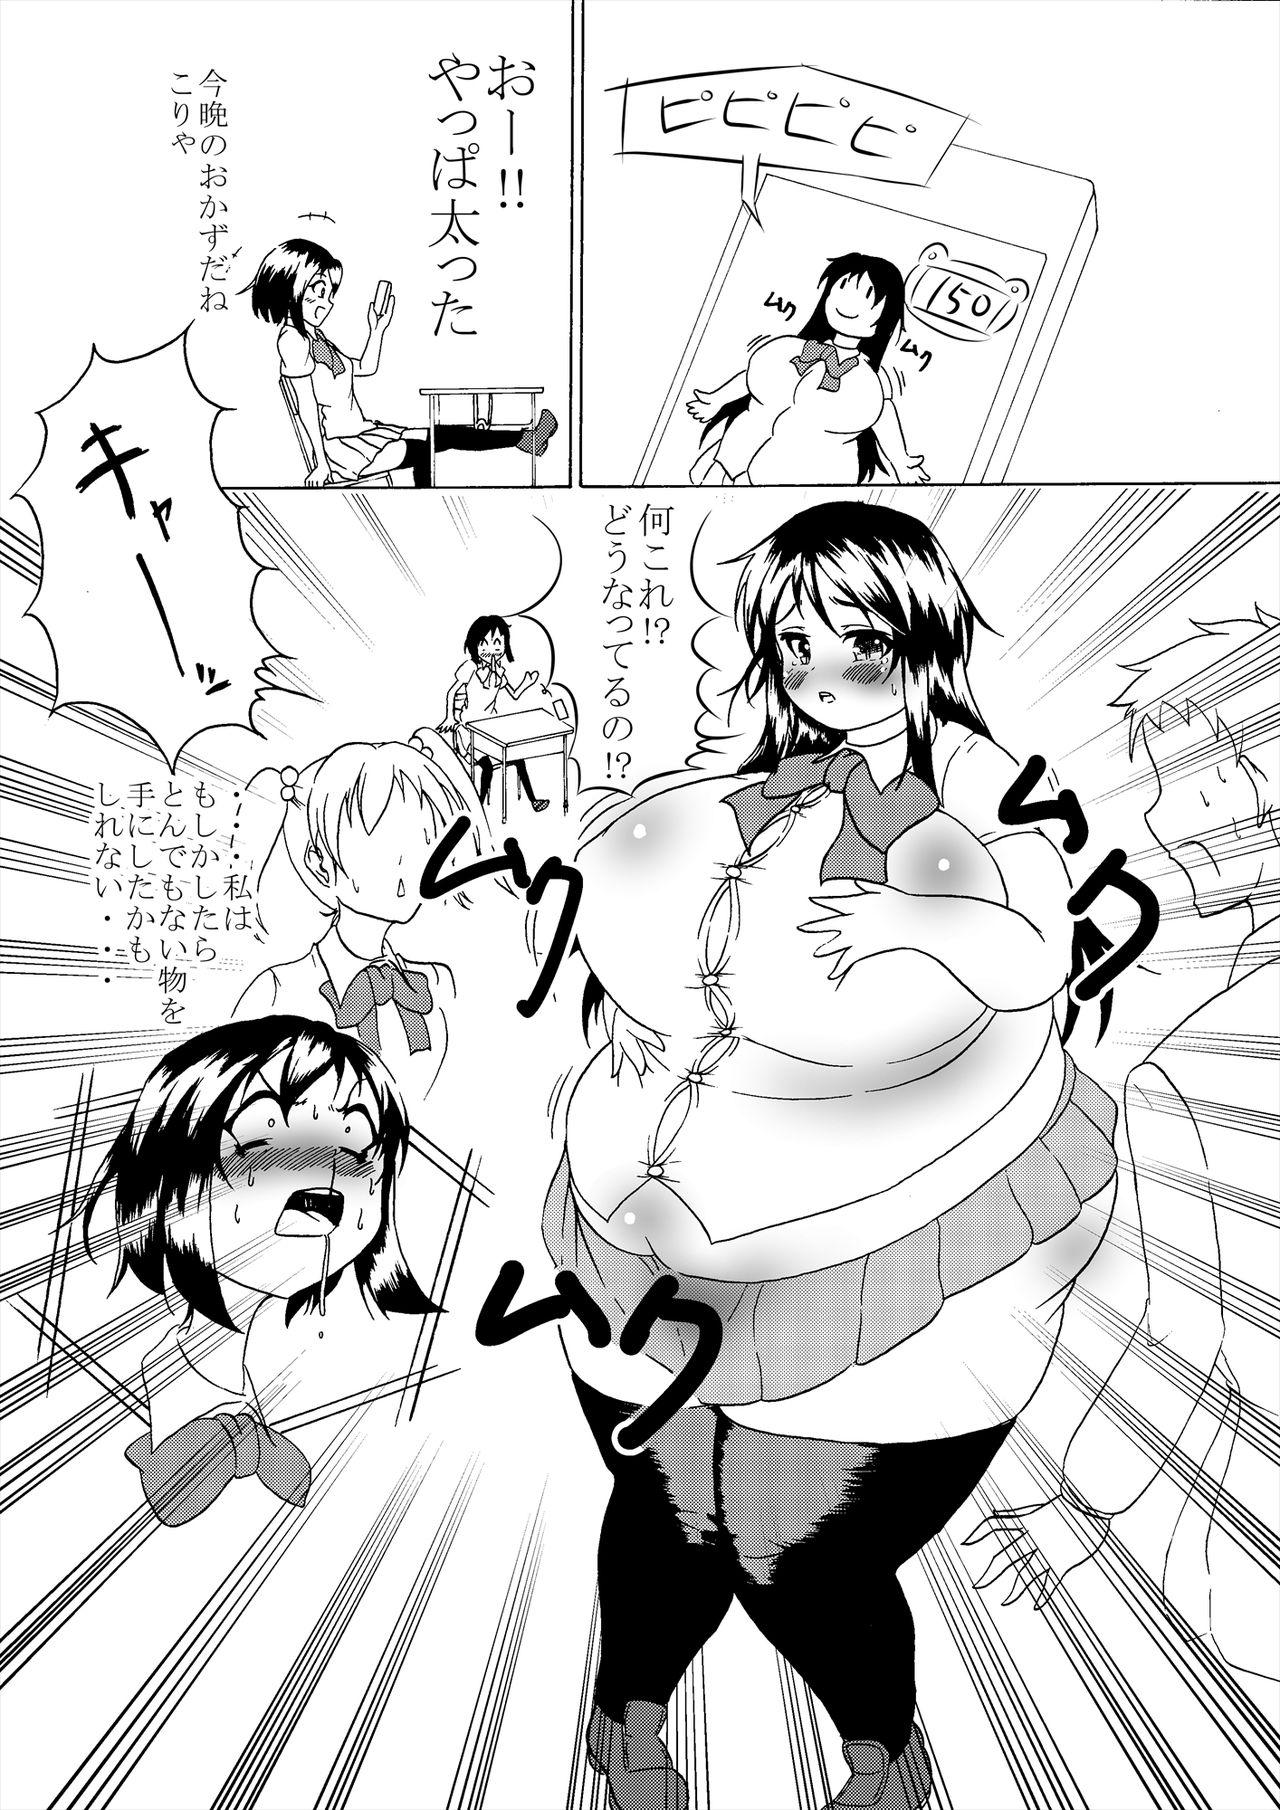 Oiled Comics Collection of Kukuru - Touhou project Kantai collection Haydee Hoe - Page 7